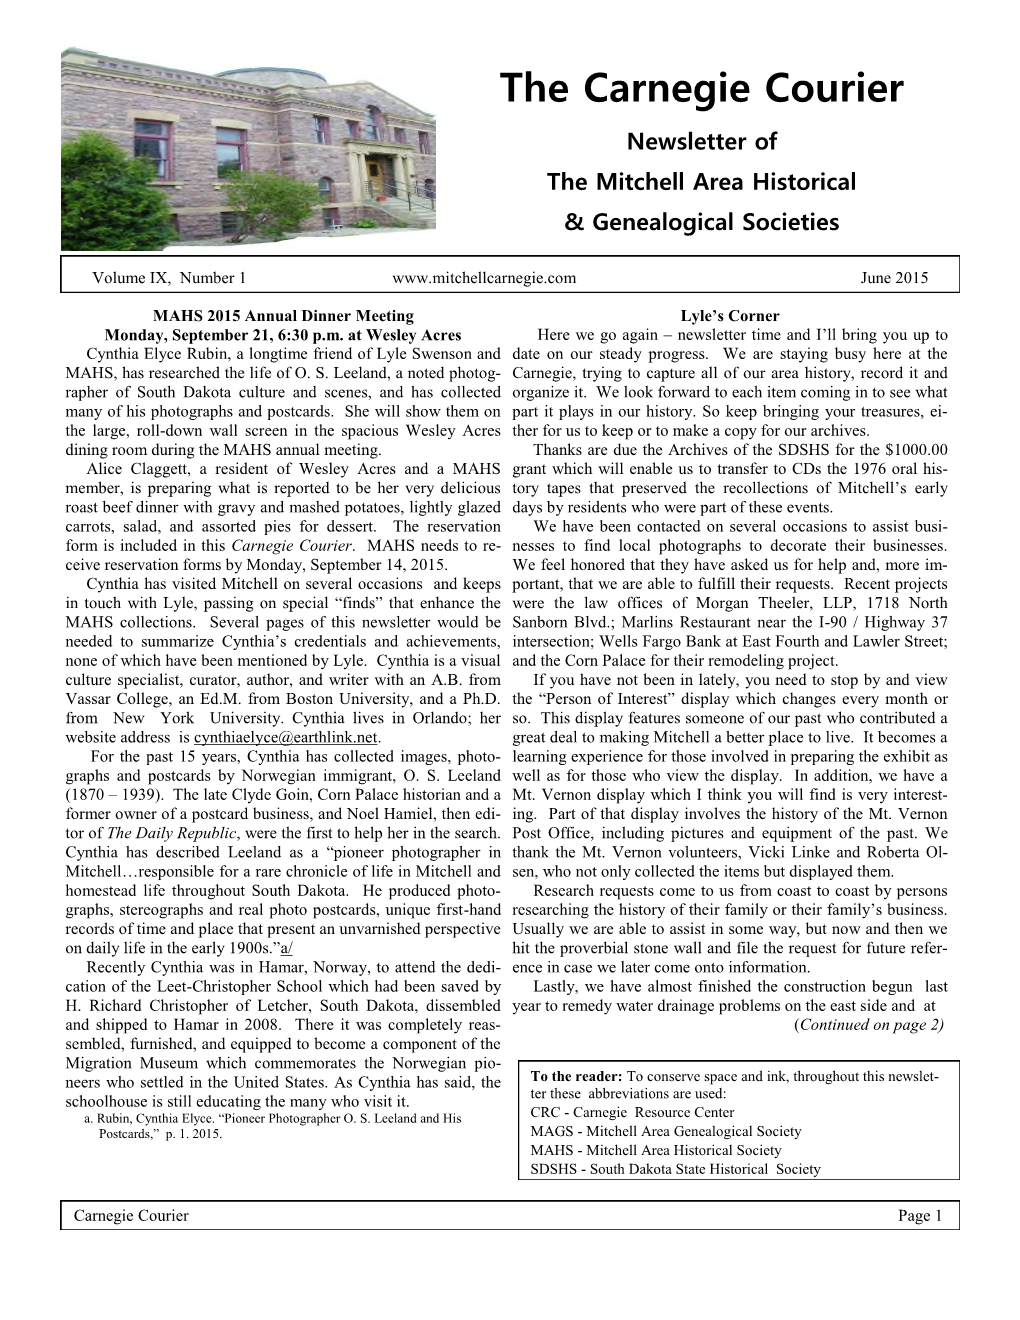 The Carnegie Courier Newsletter of the Mitchell Area Historical & Genealogical Societies